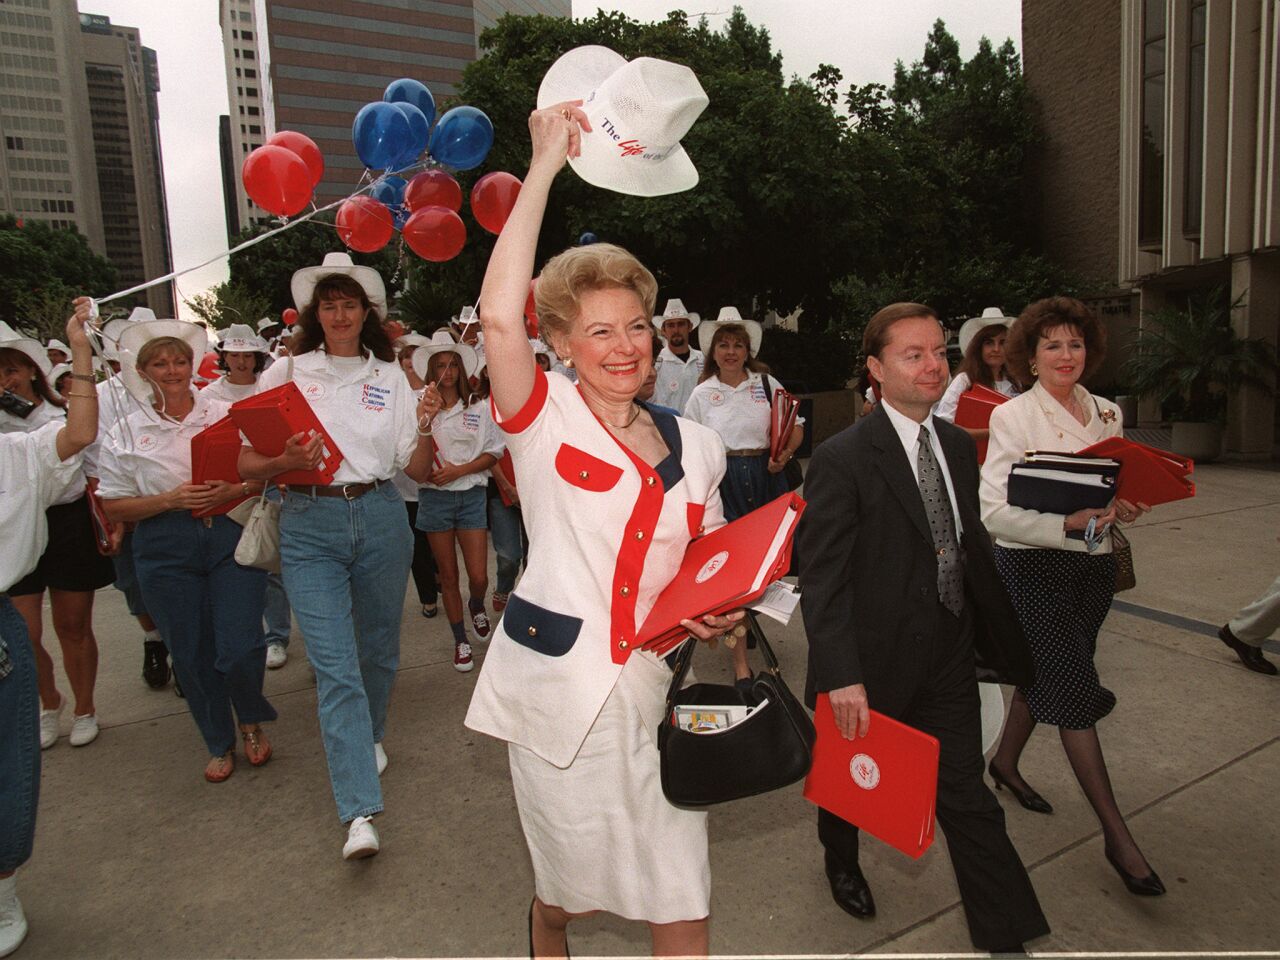 Republican National Coalition for Life Chairwoman Phyllis Schlafly waves her hat as she leads her group to the Republican platform hearing in San Diego in 1996.